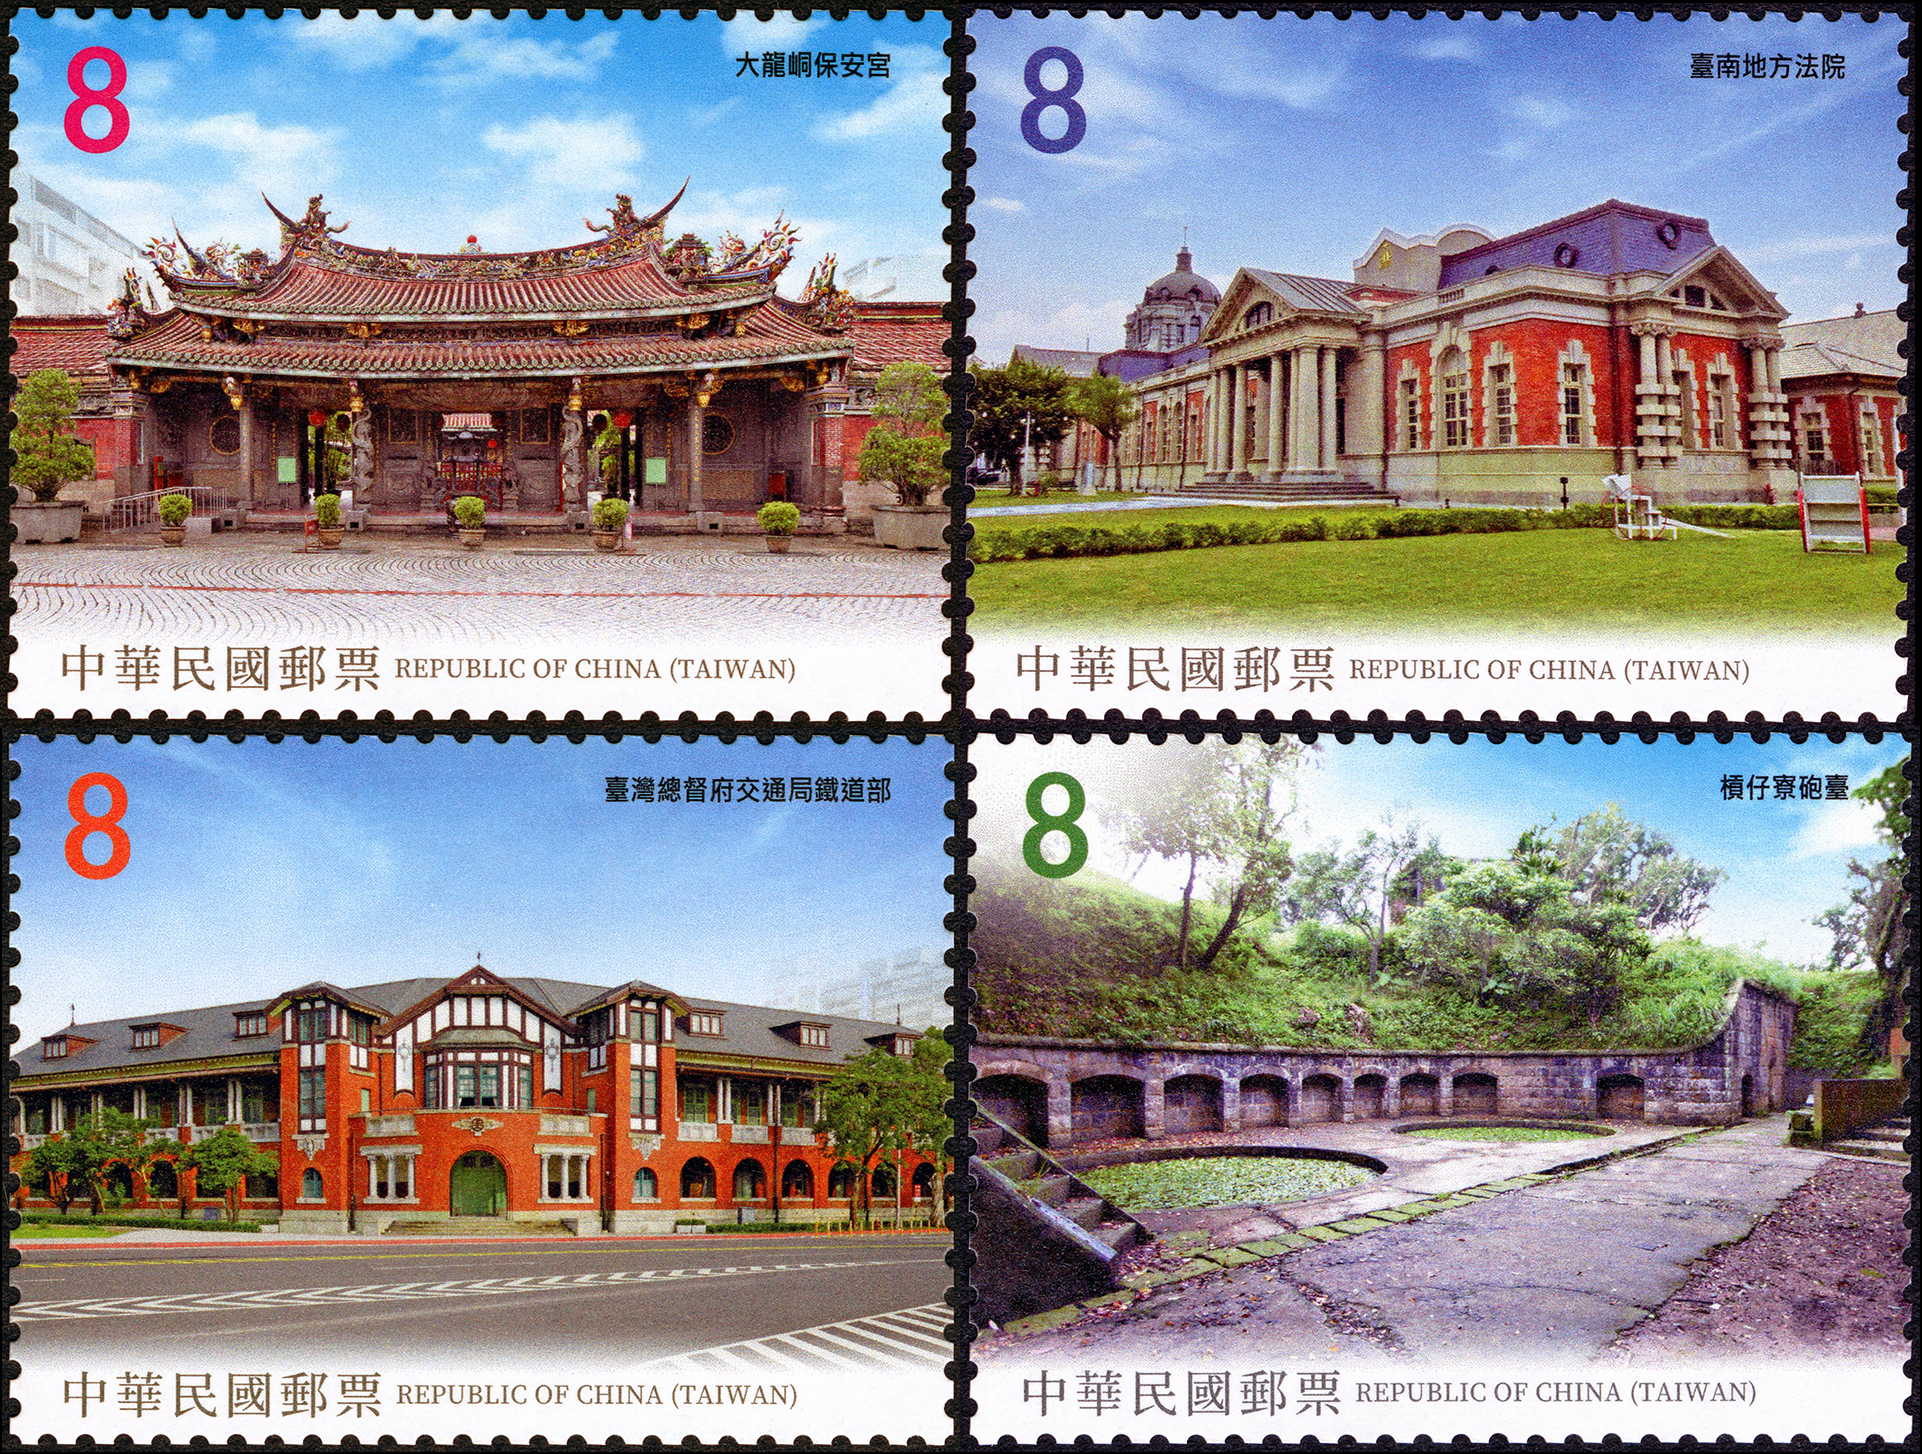 Taiwan Relics Postage Stamps (Issue of 2020)